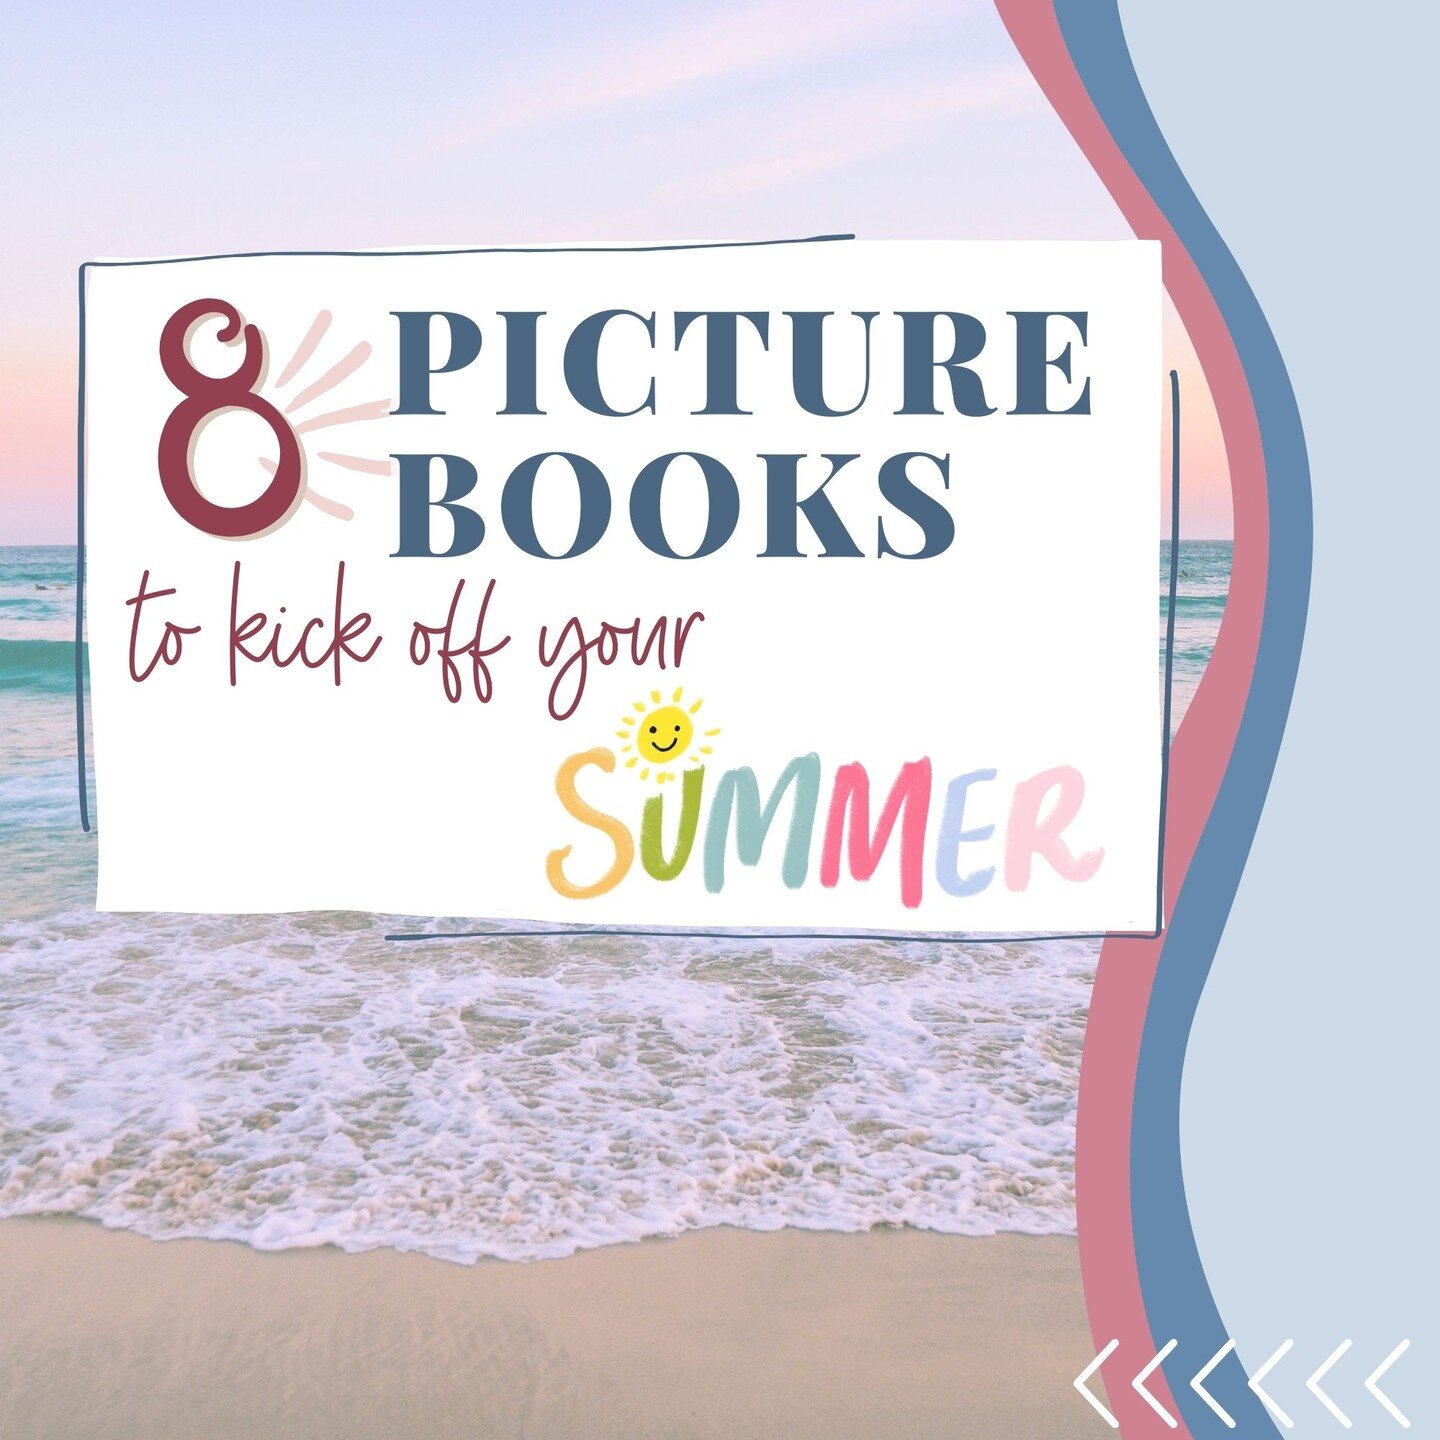 What are you reading this summer? 🌞

Grab a copy of my recommendations for 8 picture books to kick off your summer...link in bio.

Let me know in the comments what your favorite summer read is...

#picturebooks #readaloud #picturebooksofinstagram #p